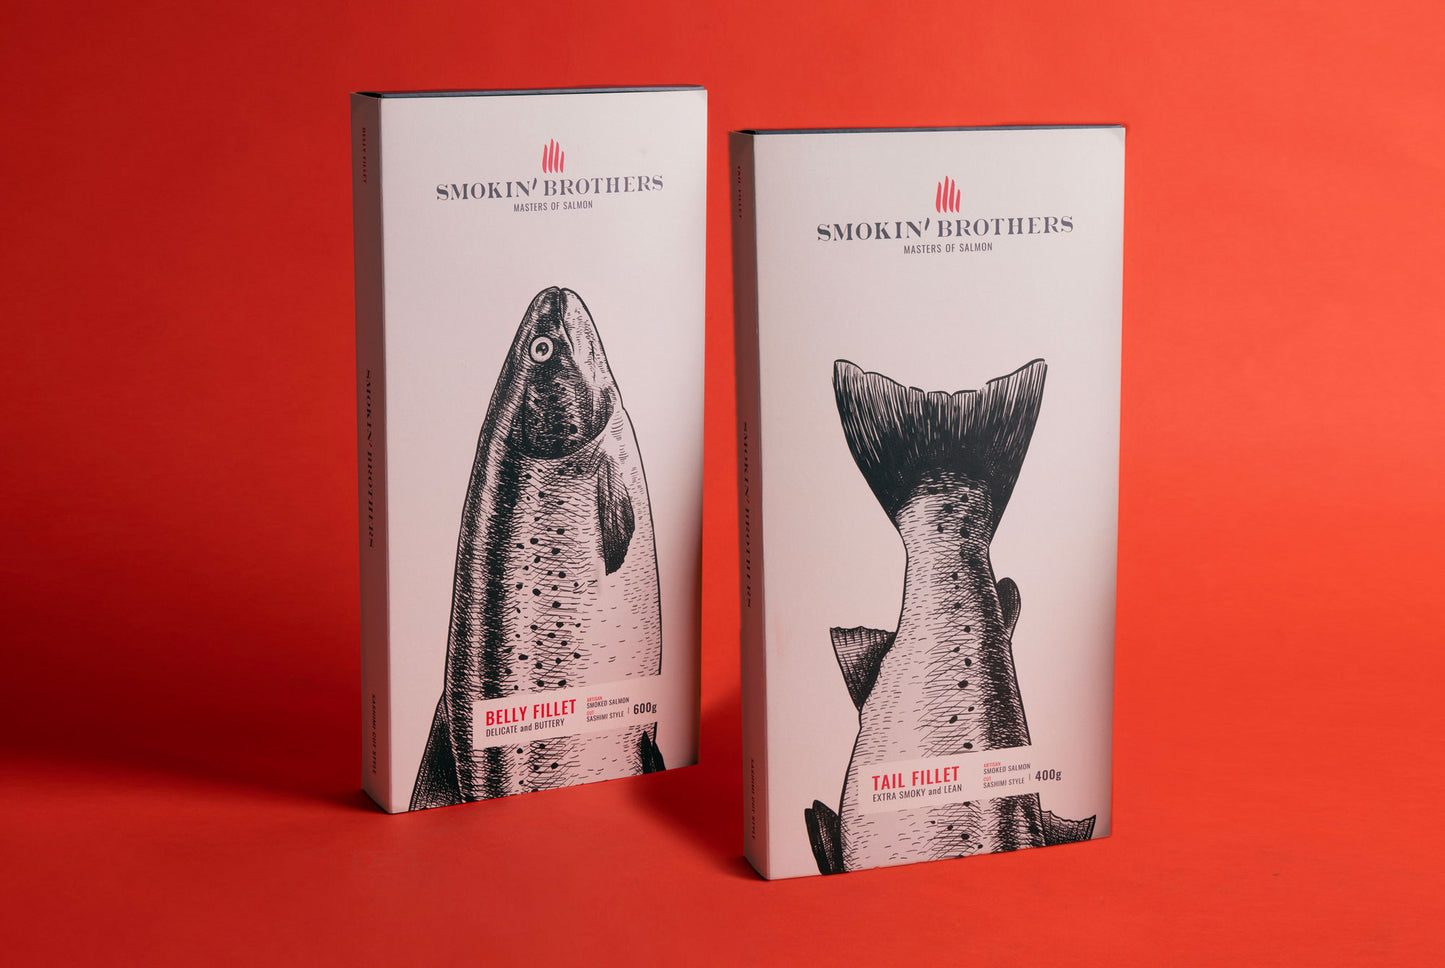 Why eco-friendly design matters - even for a smoked salmon brand